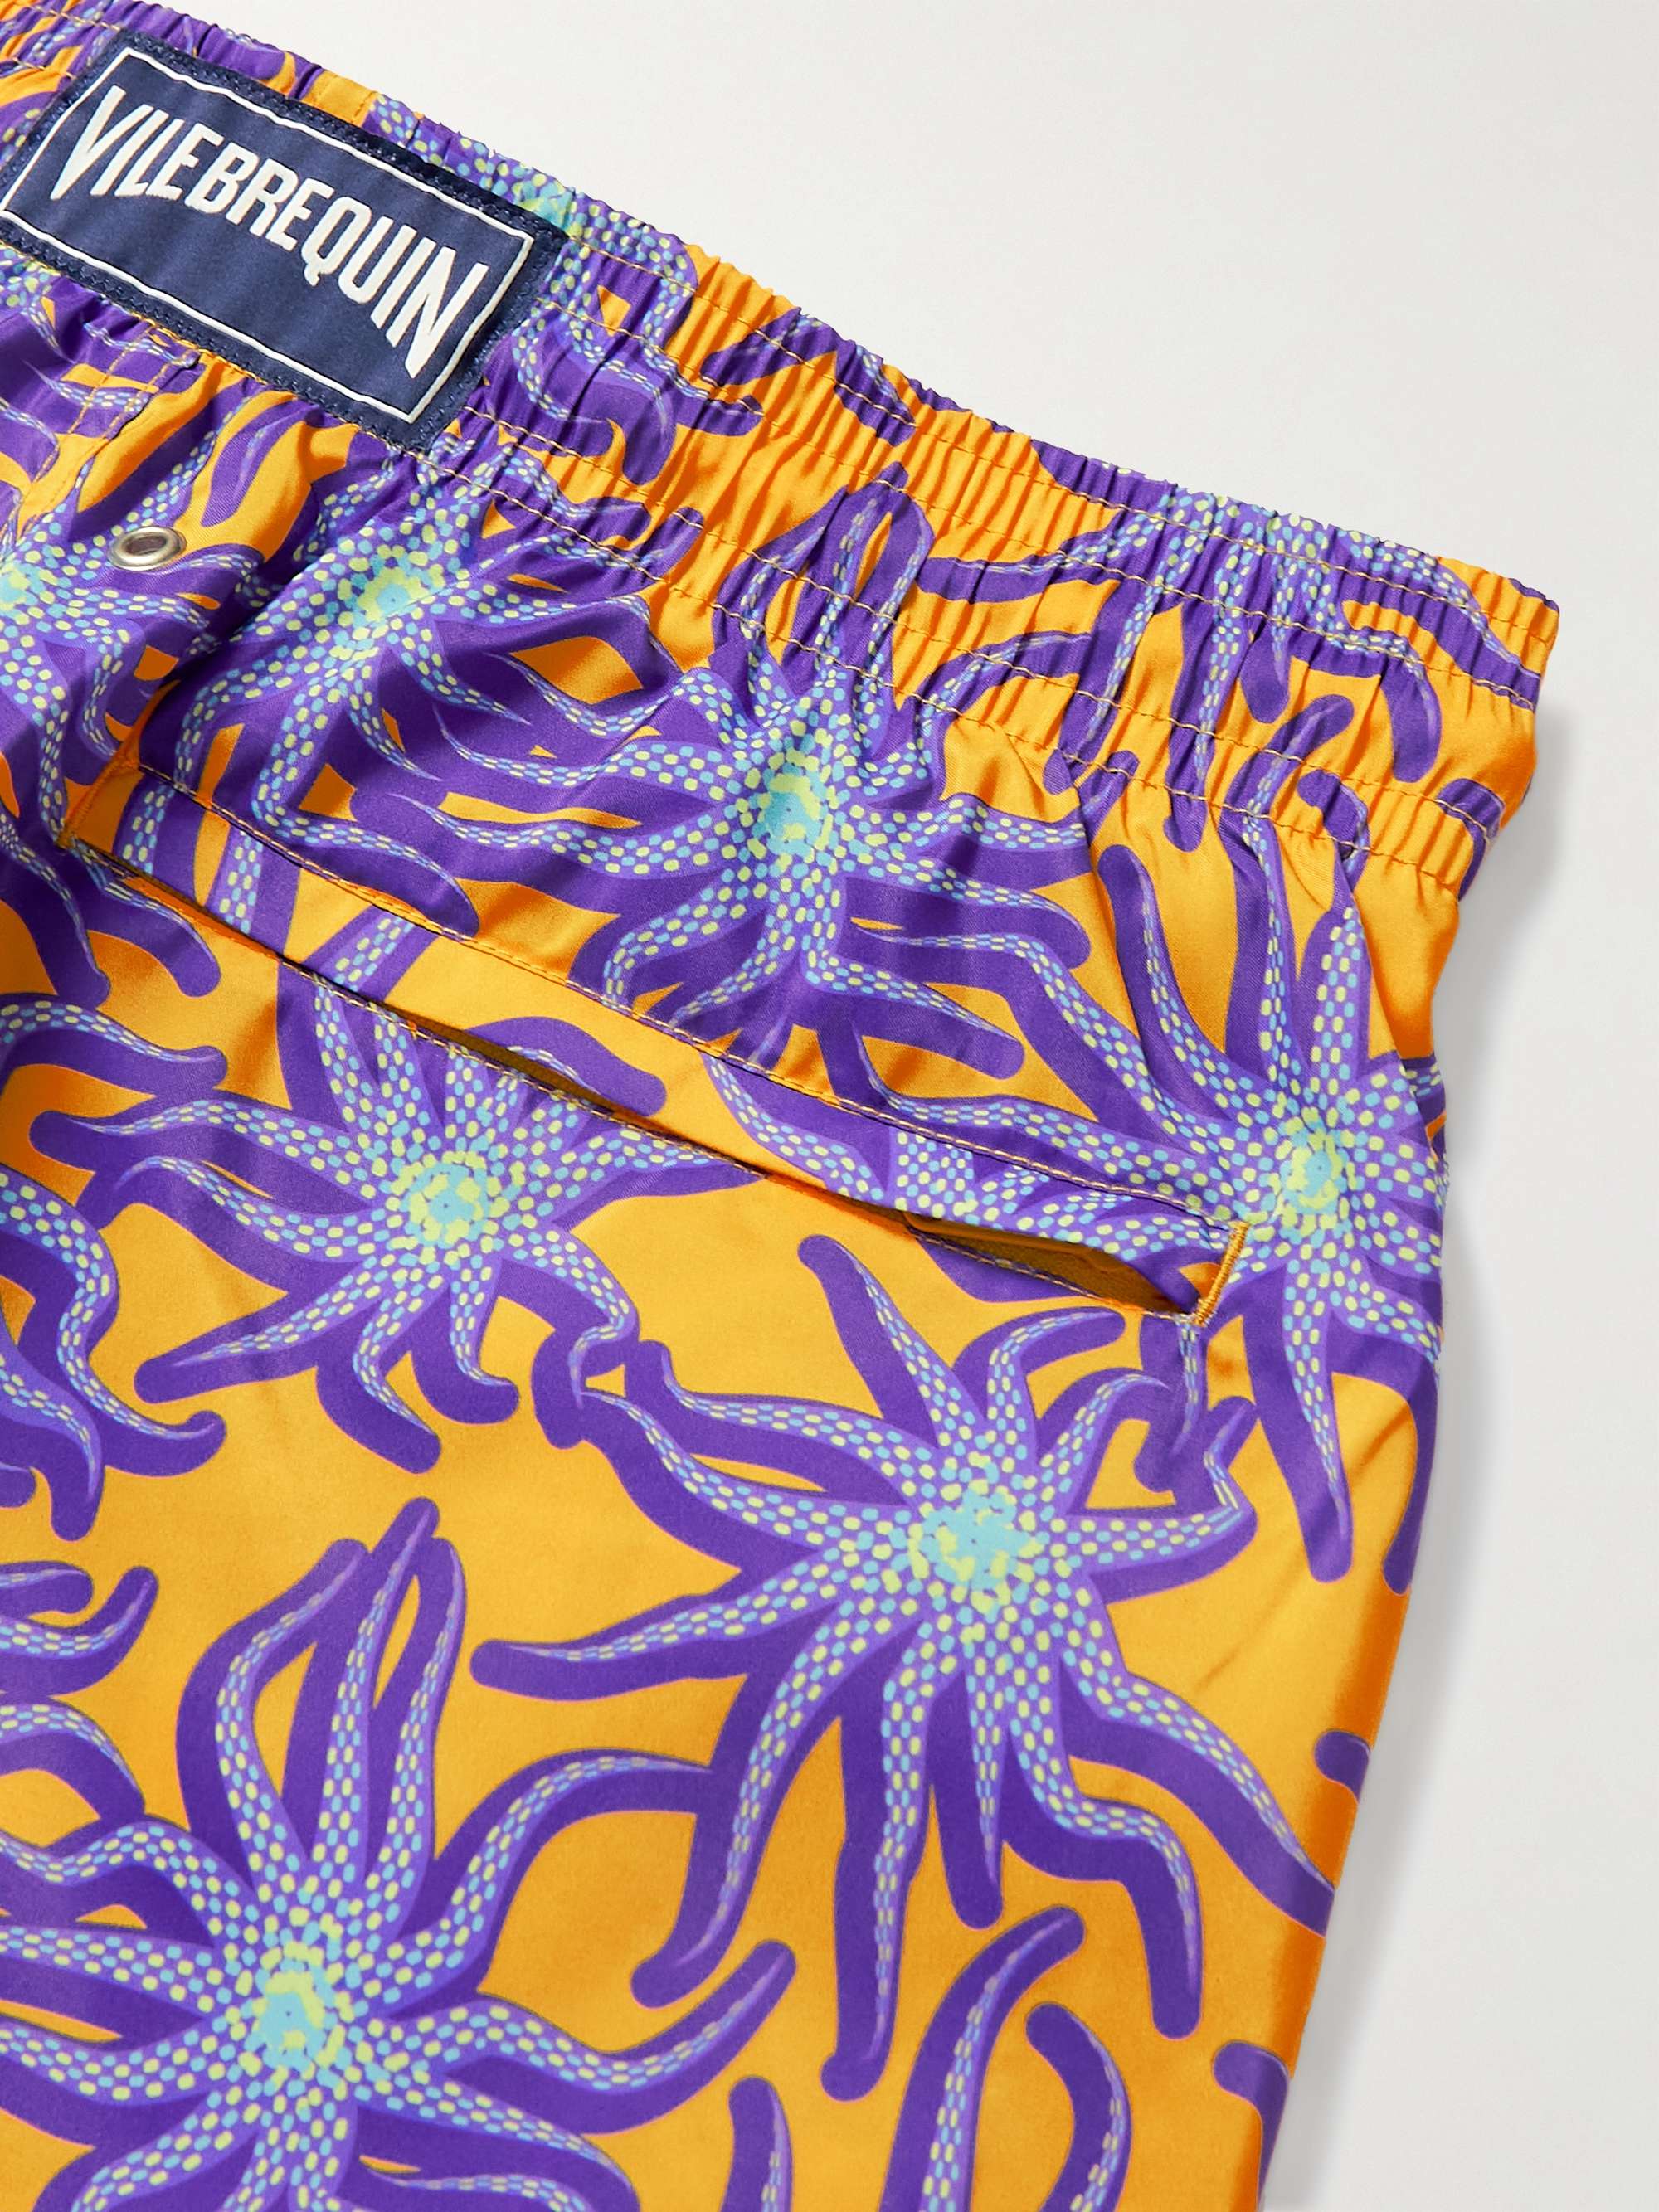 VILEBREQUIN Mahina Slim-Fit Mid-Length Tie-Dyed Recycled Swim Shorts